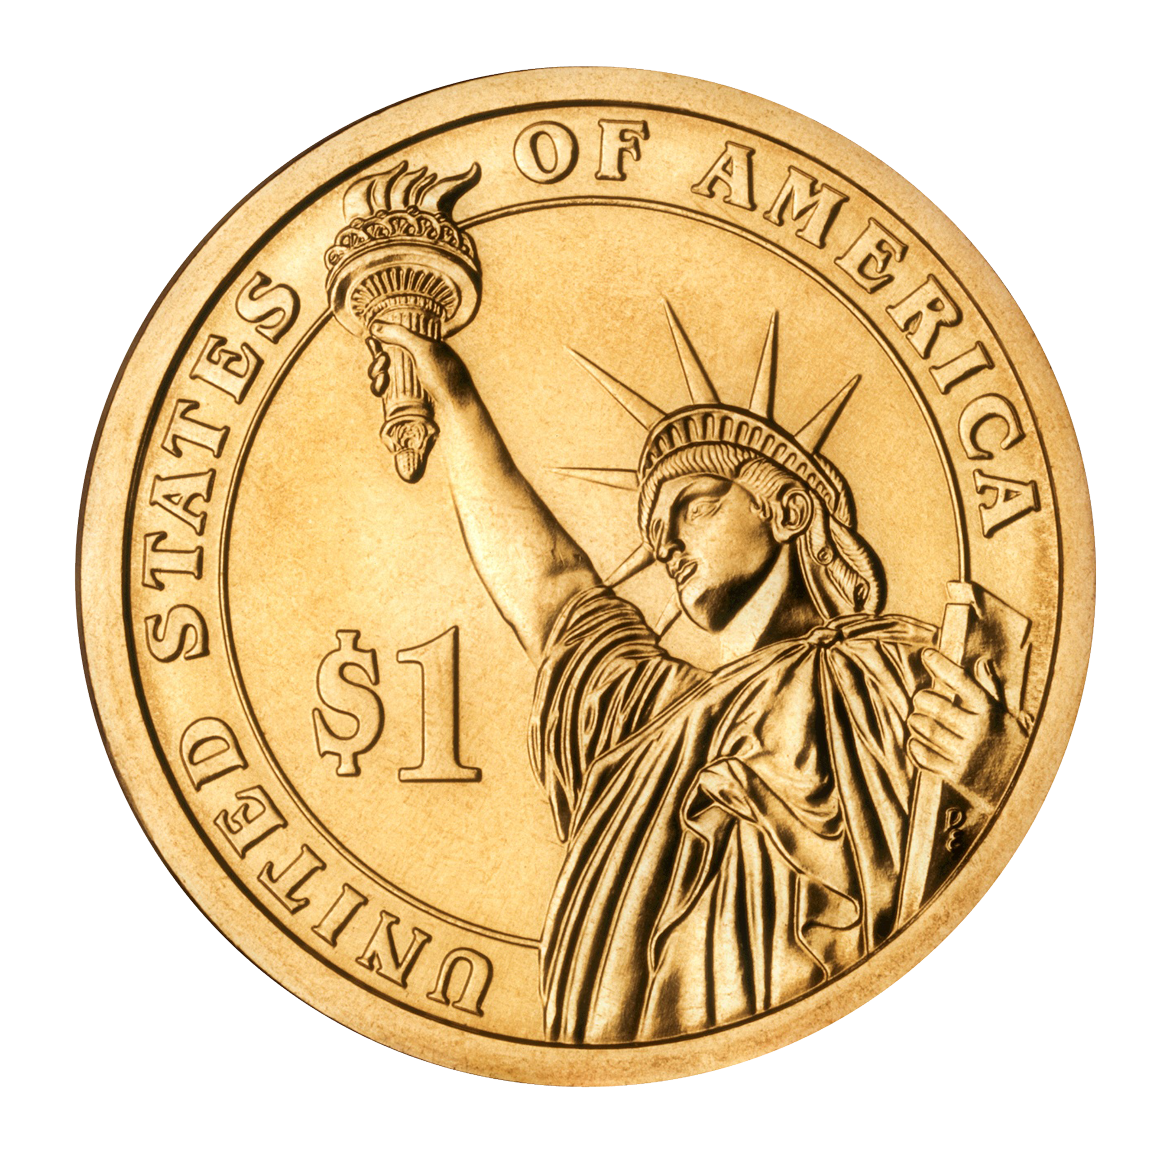 Dollar Coin Png Transparent Image - Coin, Transparent background PNG HD thumbnail